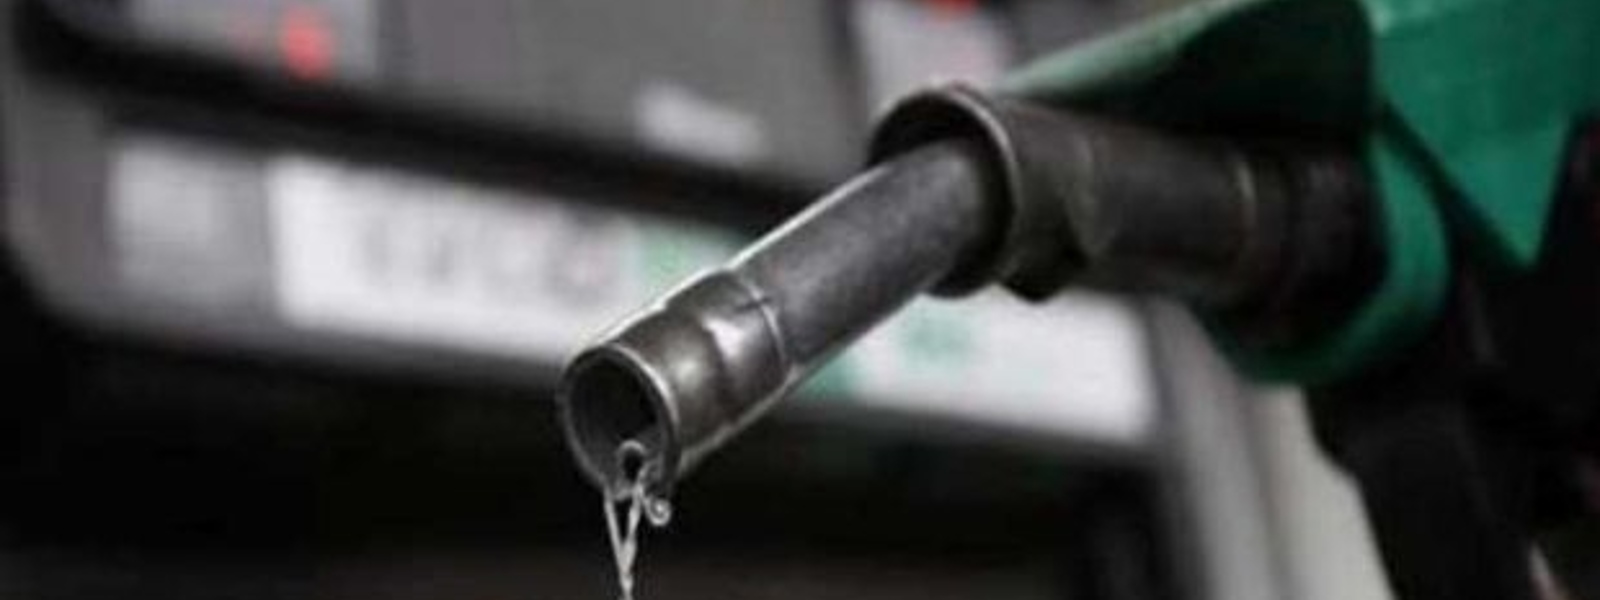 NO Fuel Price Increase & Govt to settle CEBs Rs. 80 Bn debt to CPC